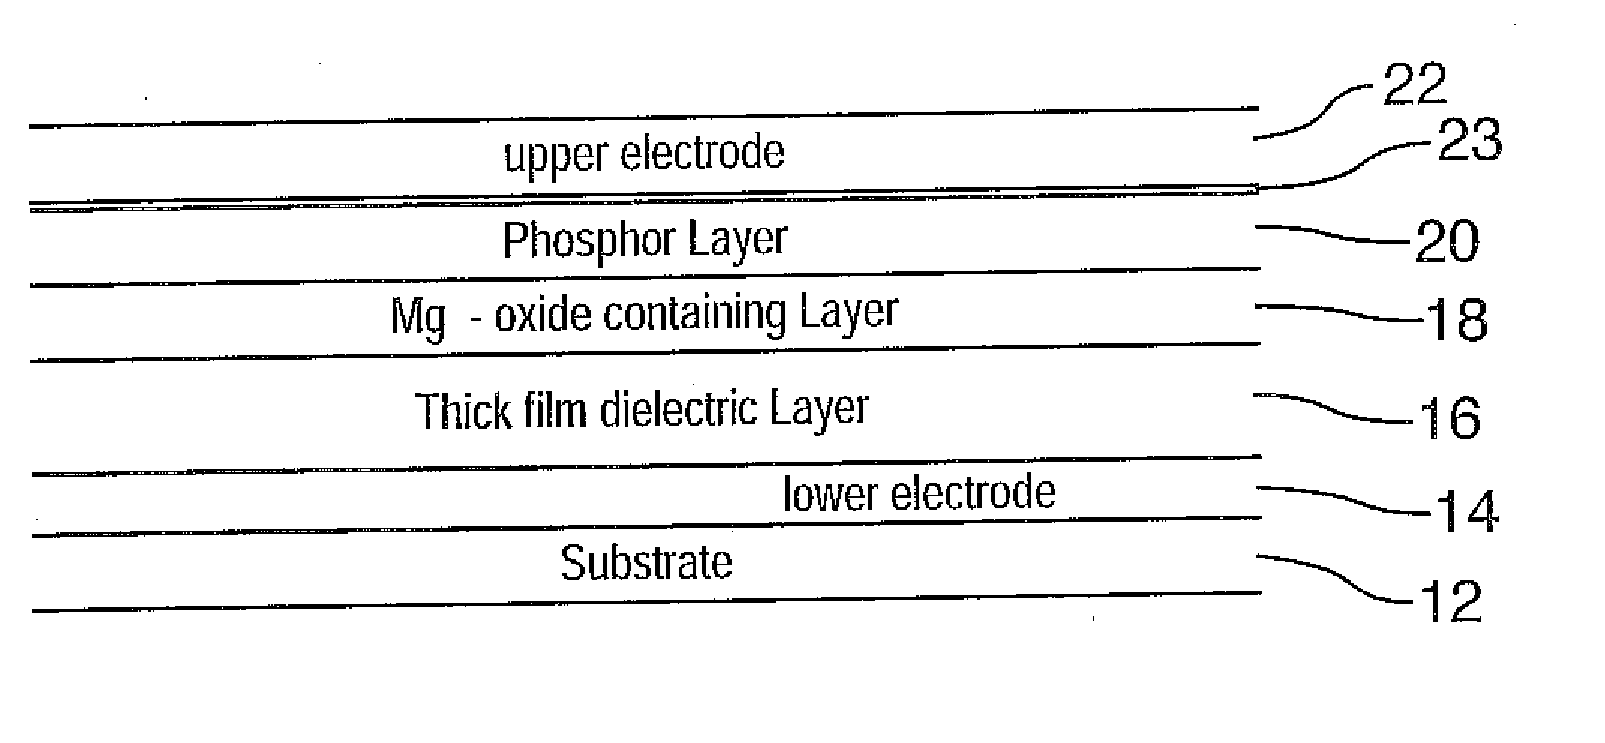 Magnesium oxide-containing barrier layer for thick dielectric electroluminescent displays